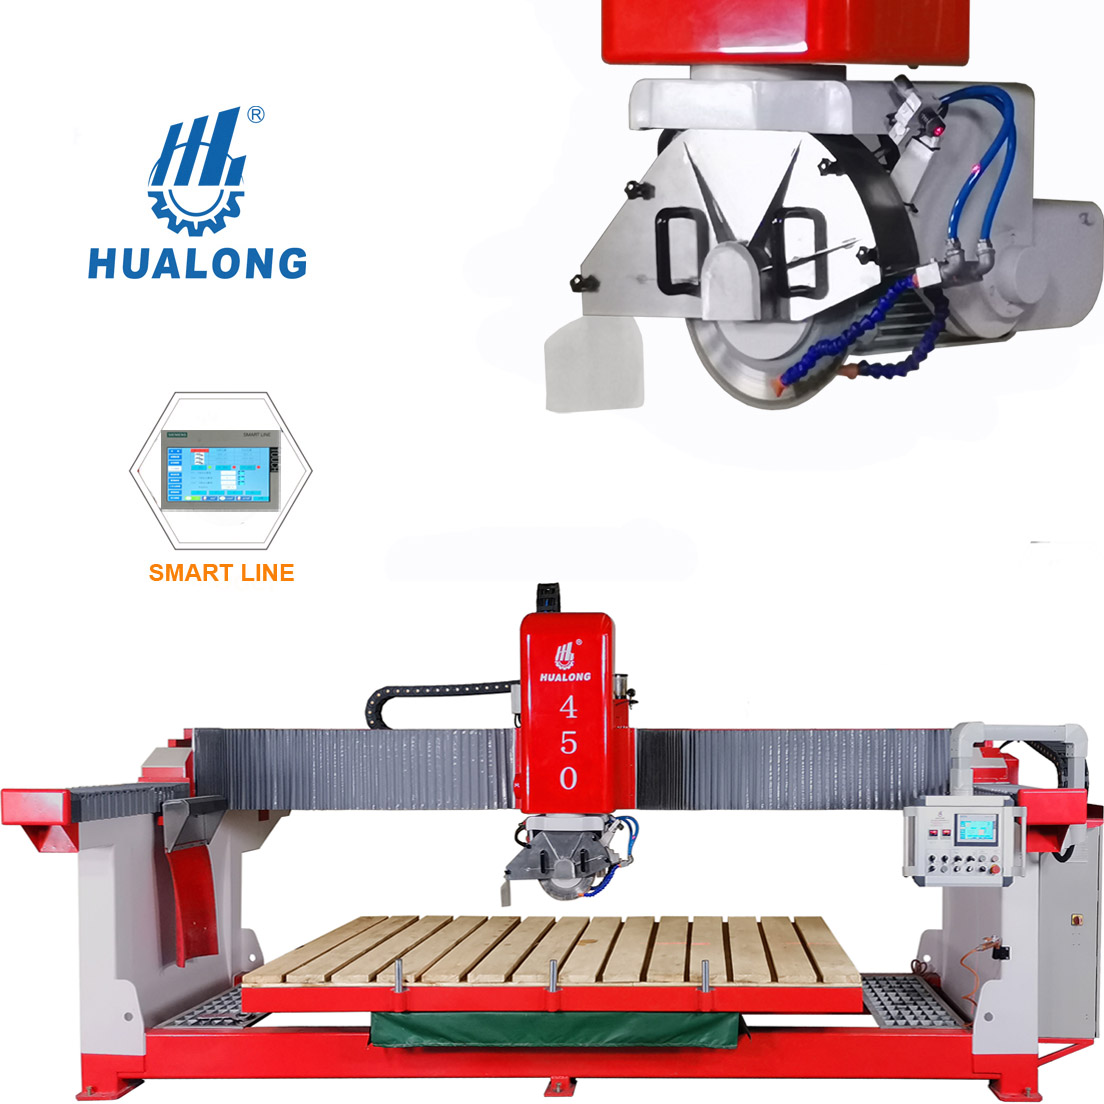 High Quality HLSQ-450 bridge Stone Cutting Machine stone slab saw cutting machine for Kitchen Cabinet Worktop Work Top Solid Surface White Artificial Marble